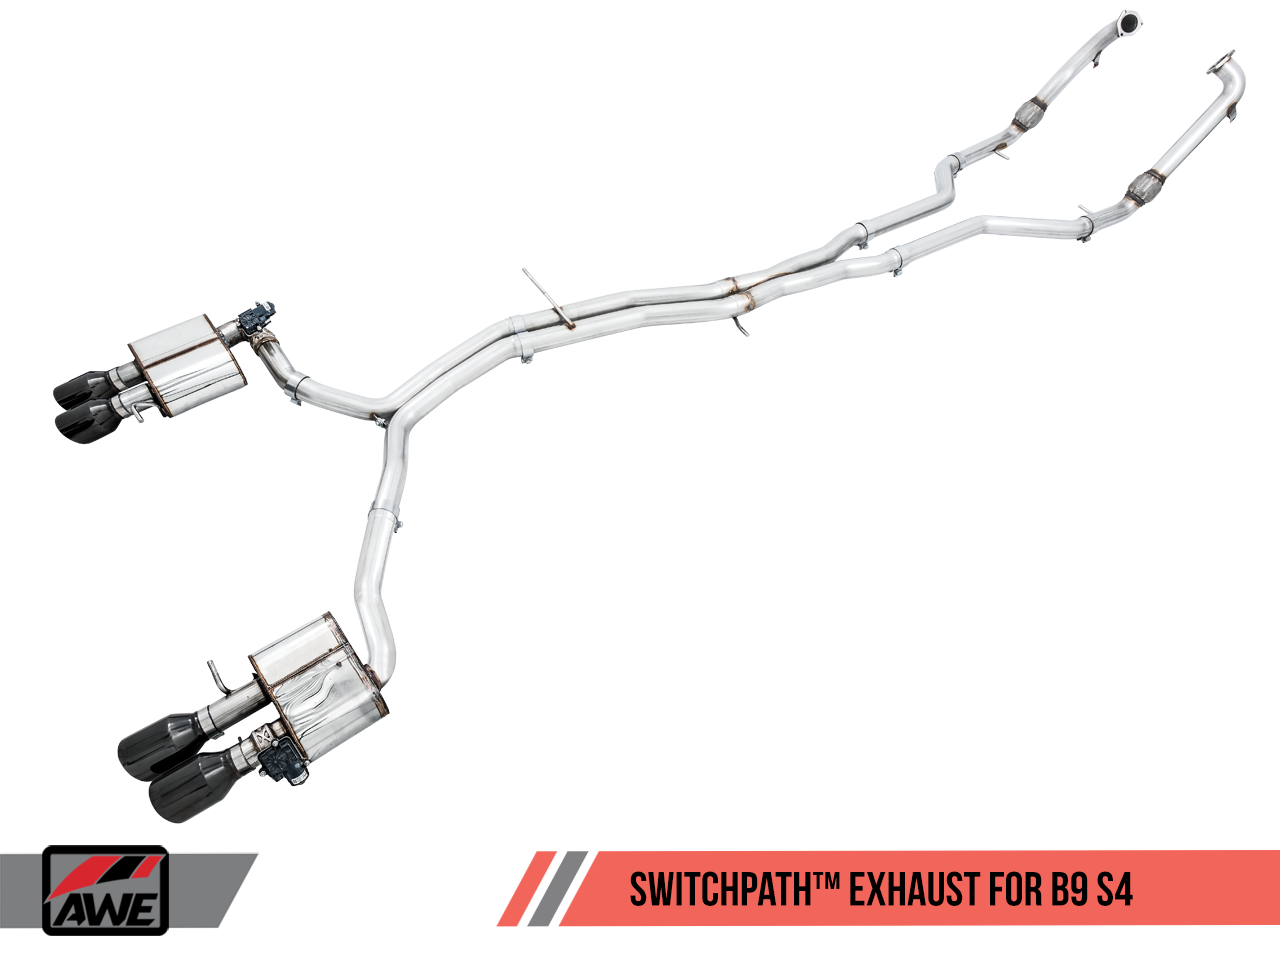 AWE SwitchPath™ Exhaust for Audi B9 S4 - Non-Resonated - Diamond Black 102mm Tips